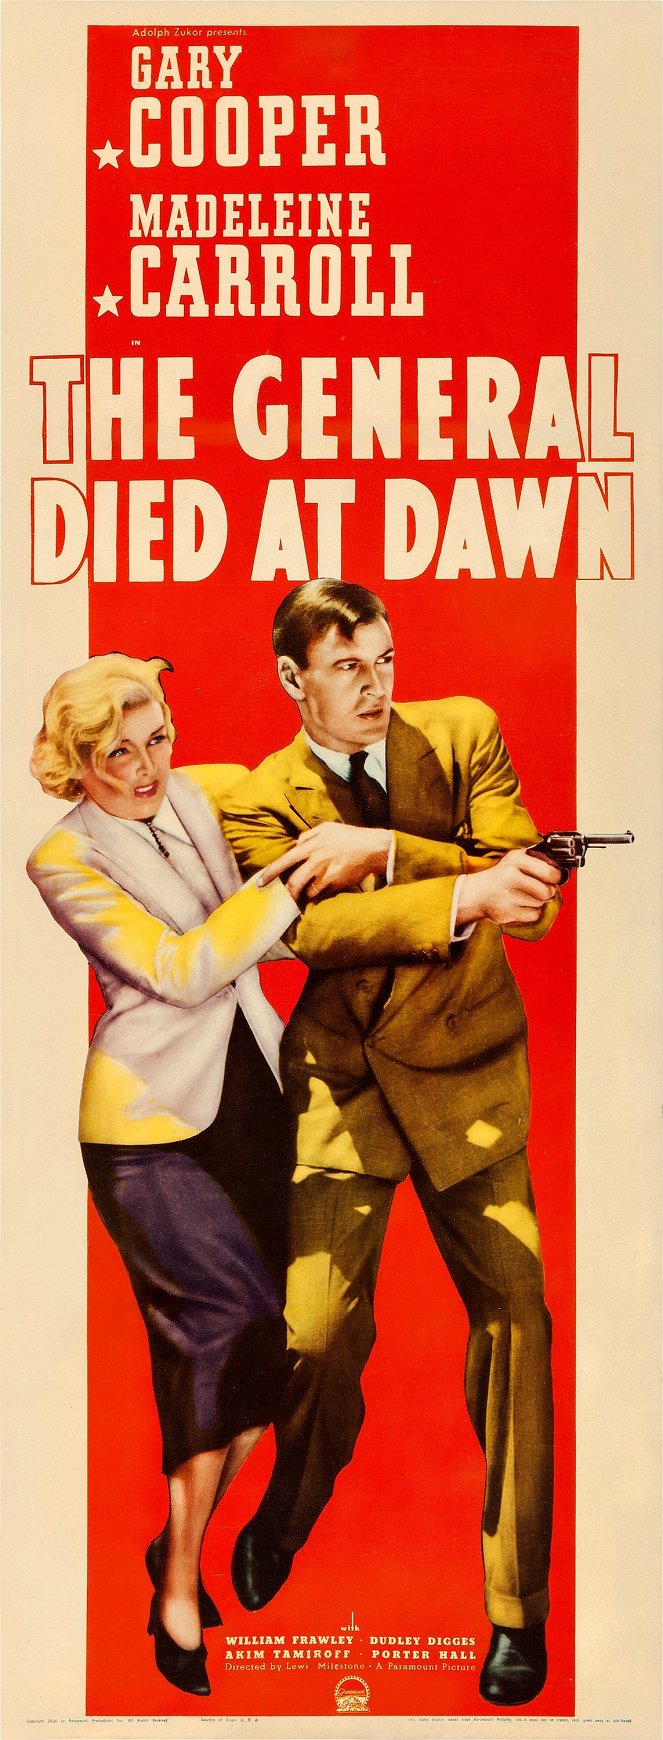 The General Died at Dawn - Posters